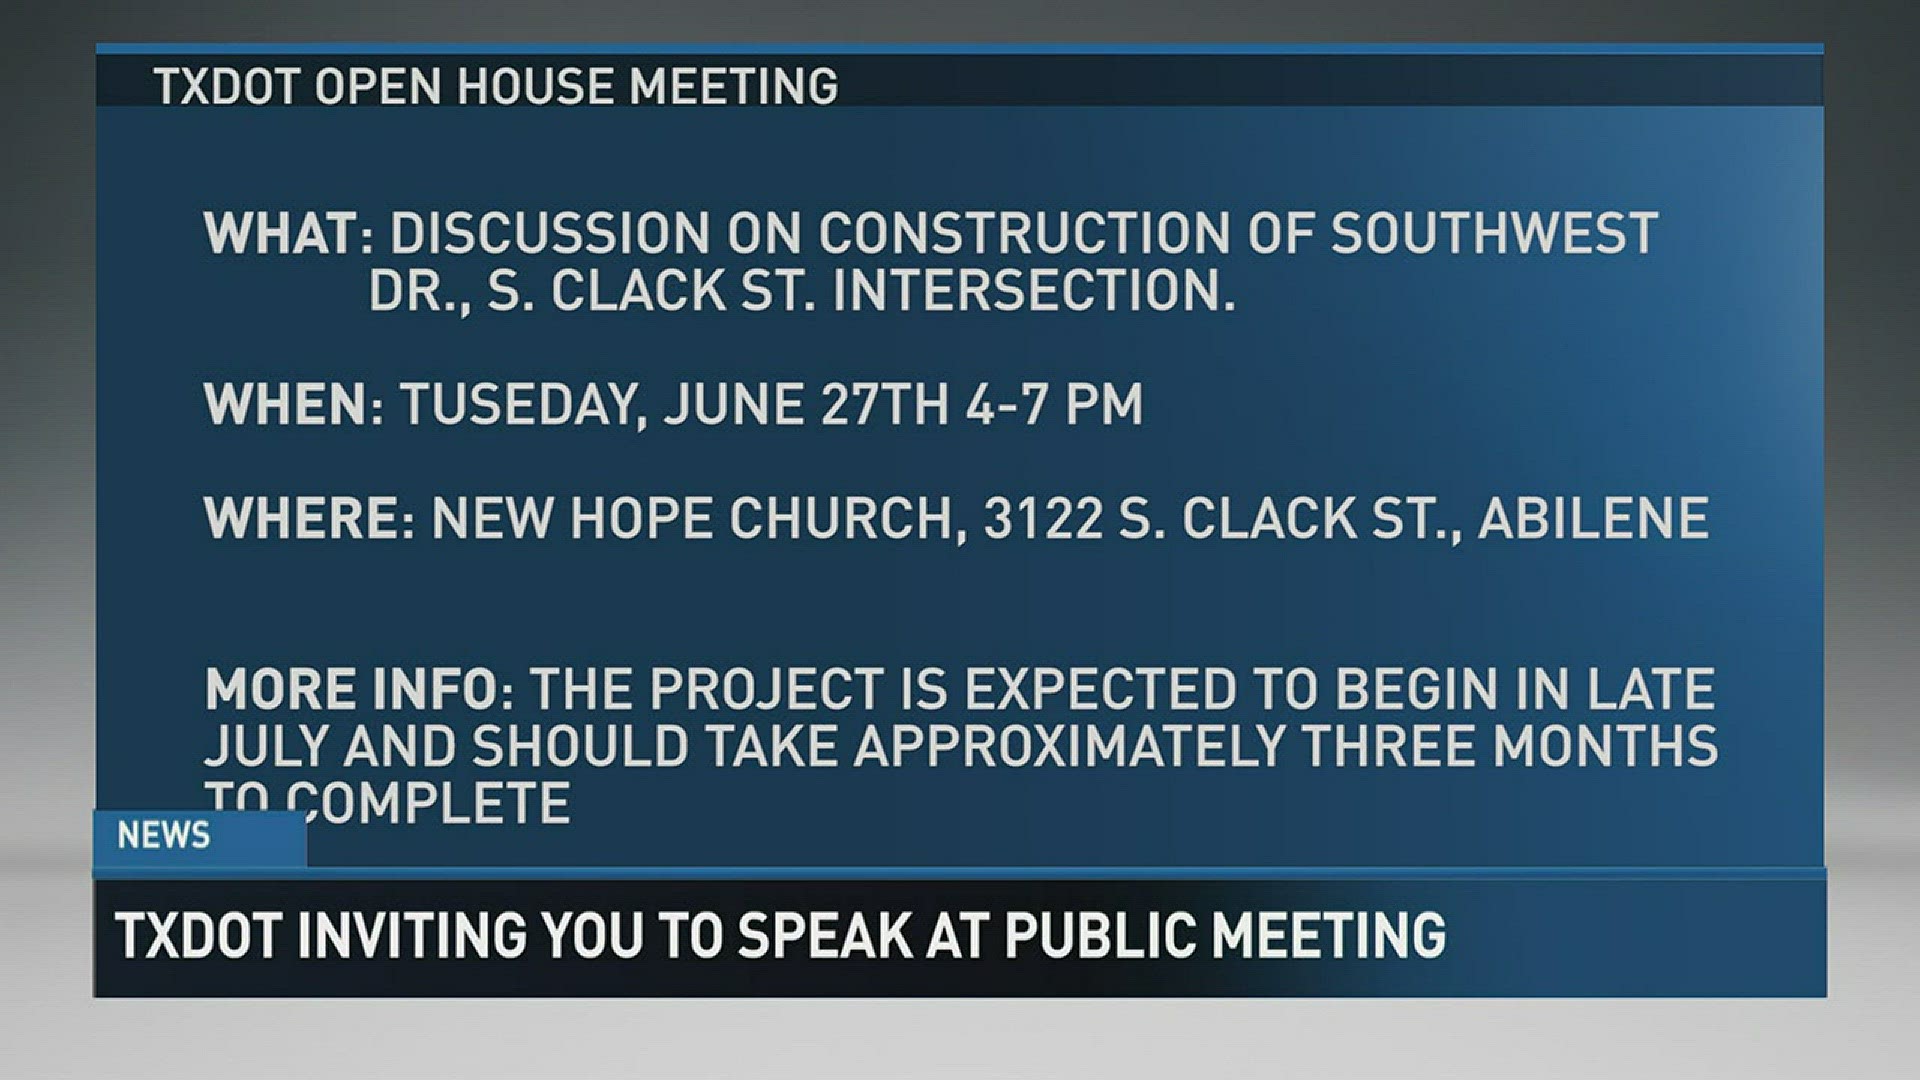 The Texas Department of Transportation's Abilene District will host a public meeting on Tuesday, June 27.